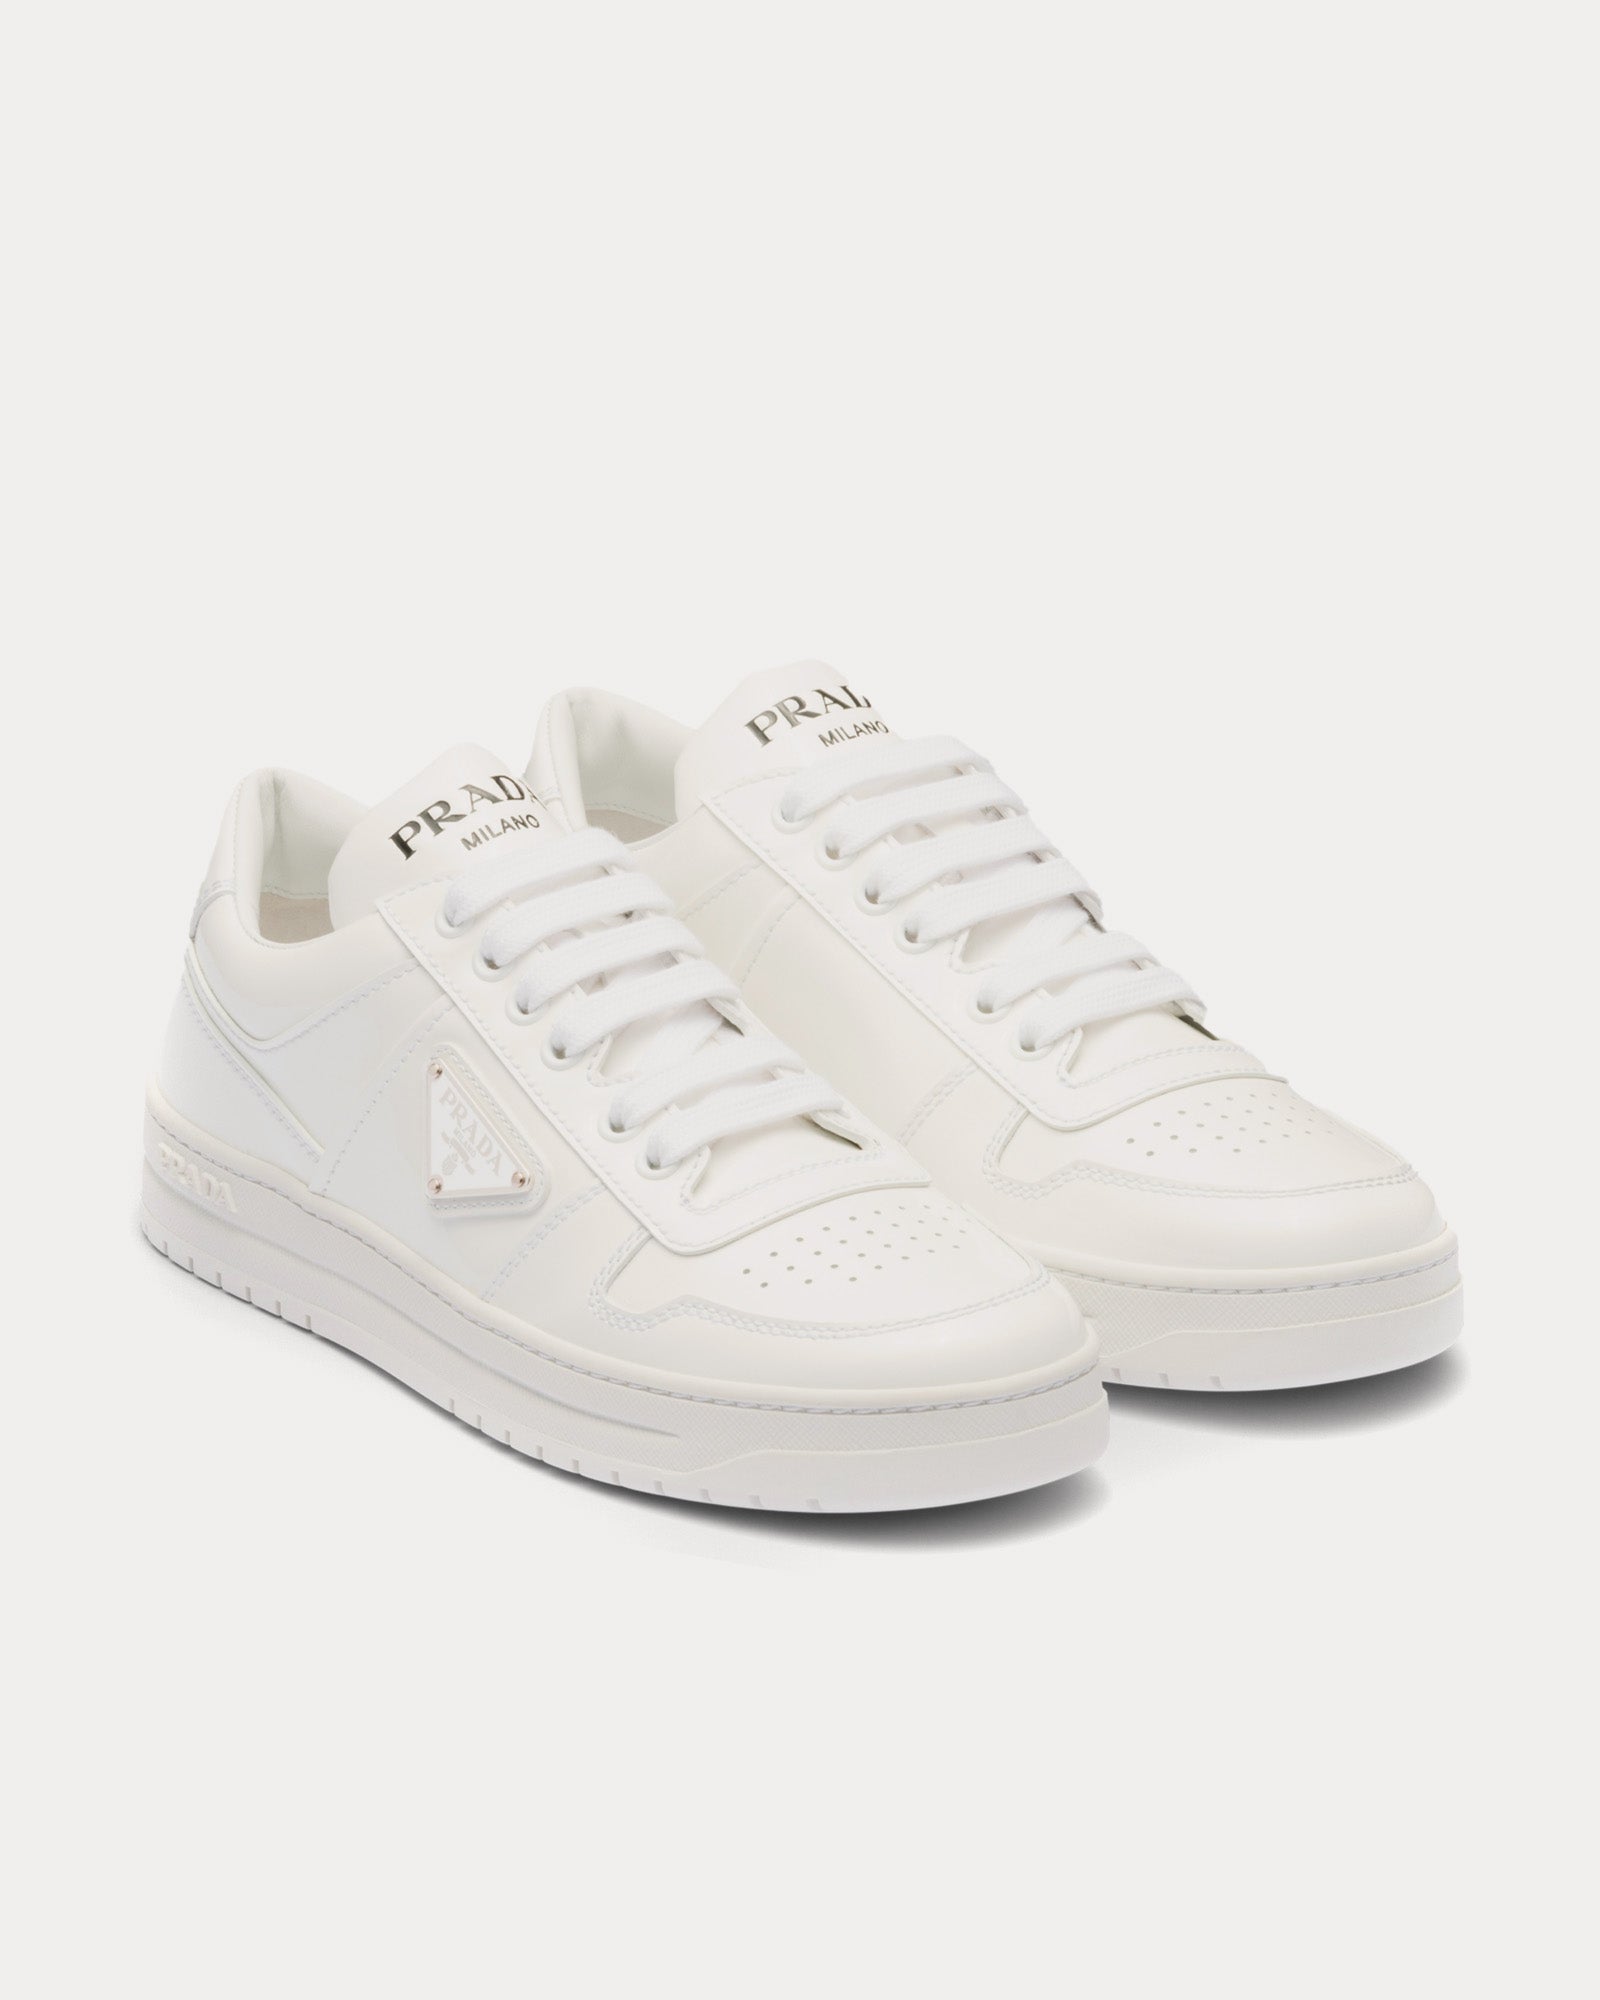 Prada Downtown Patent Leather White Low Top Sneakers - Sneak in Peace